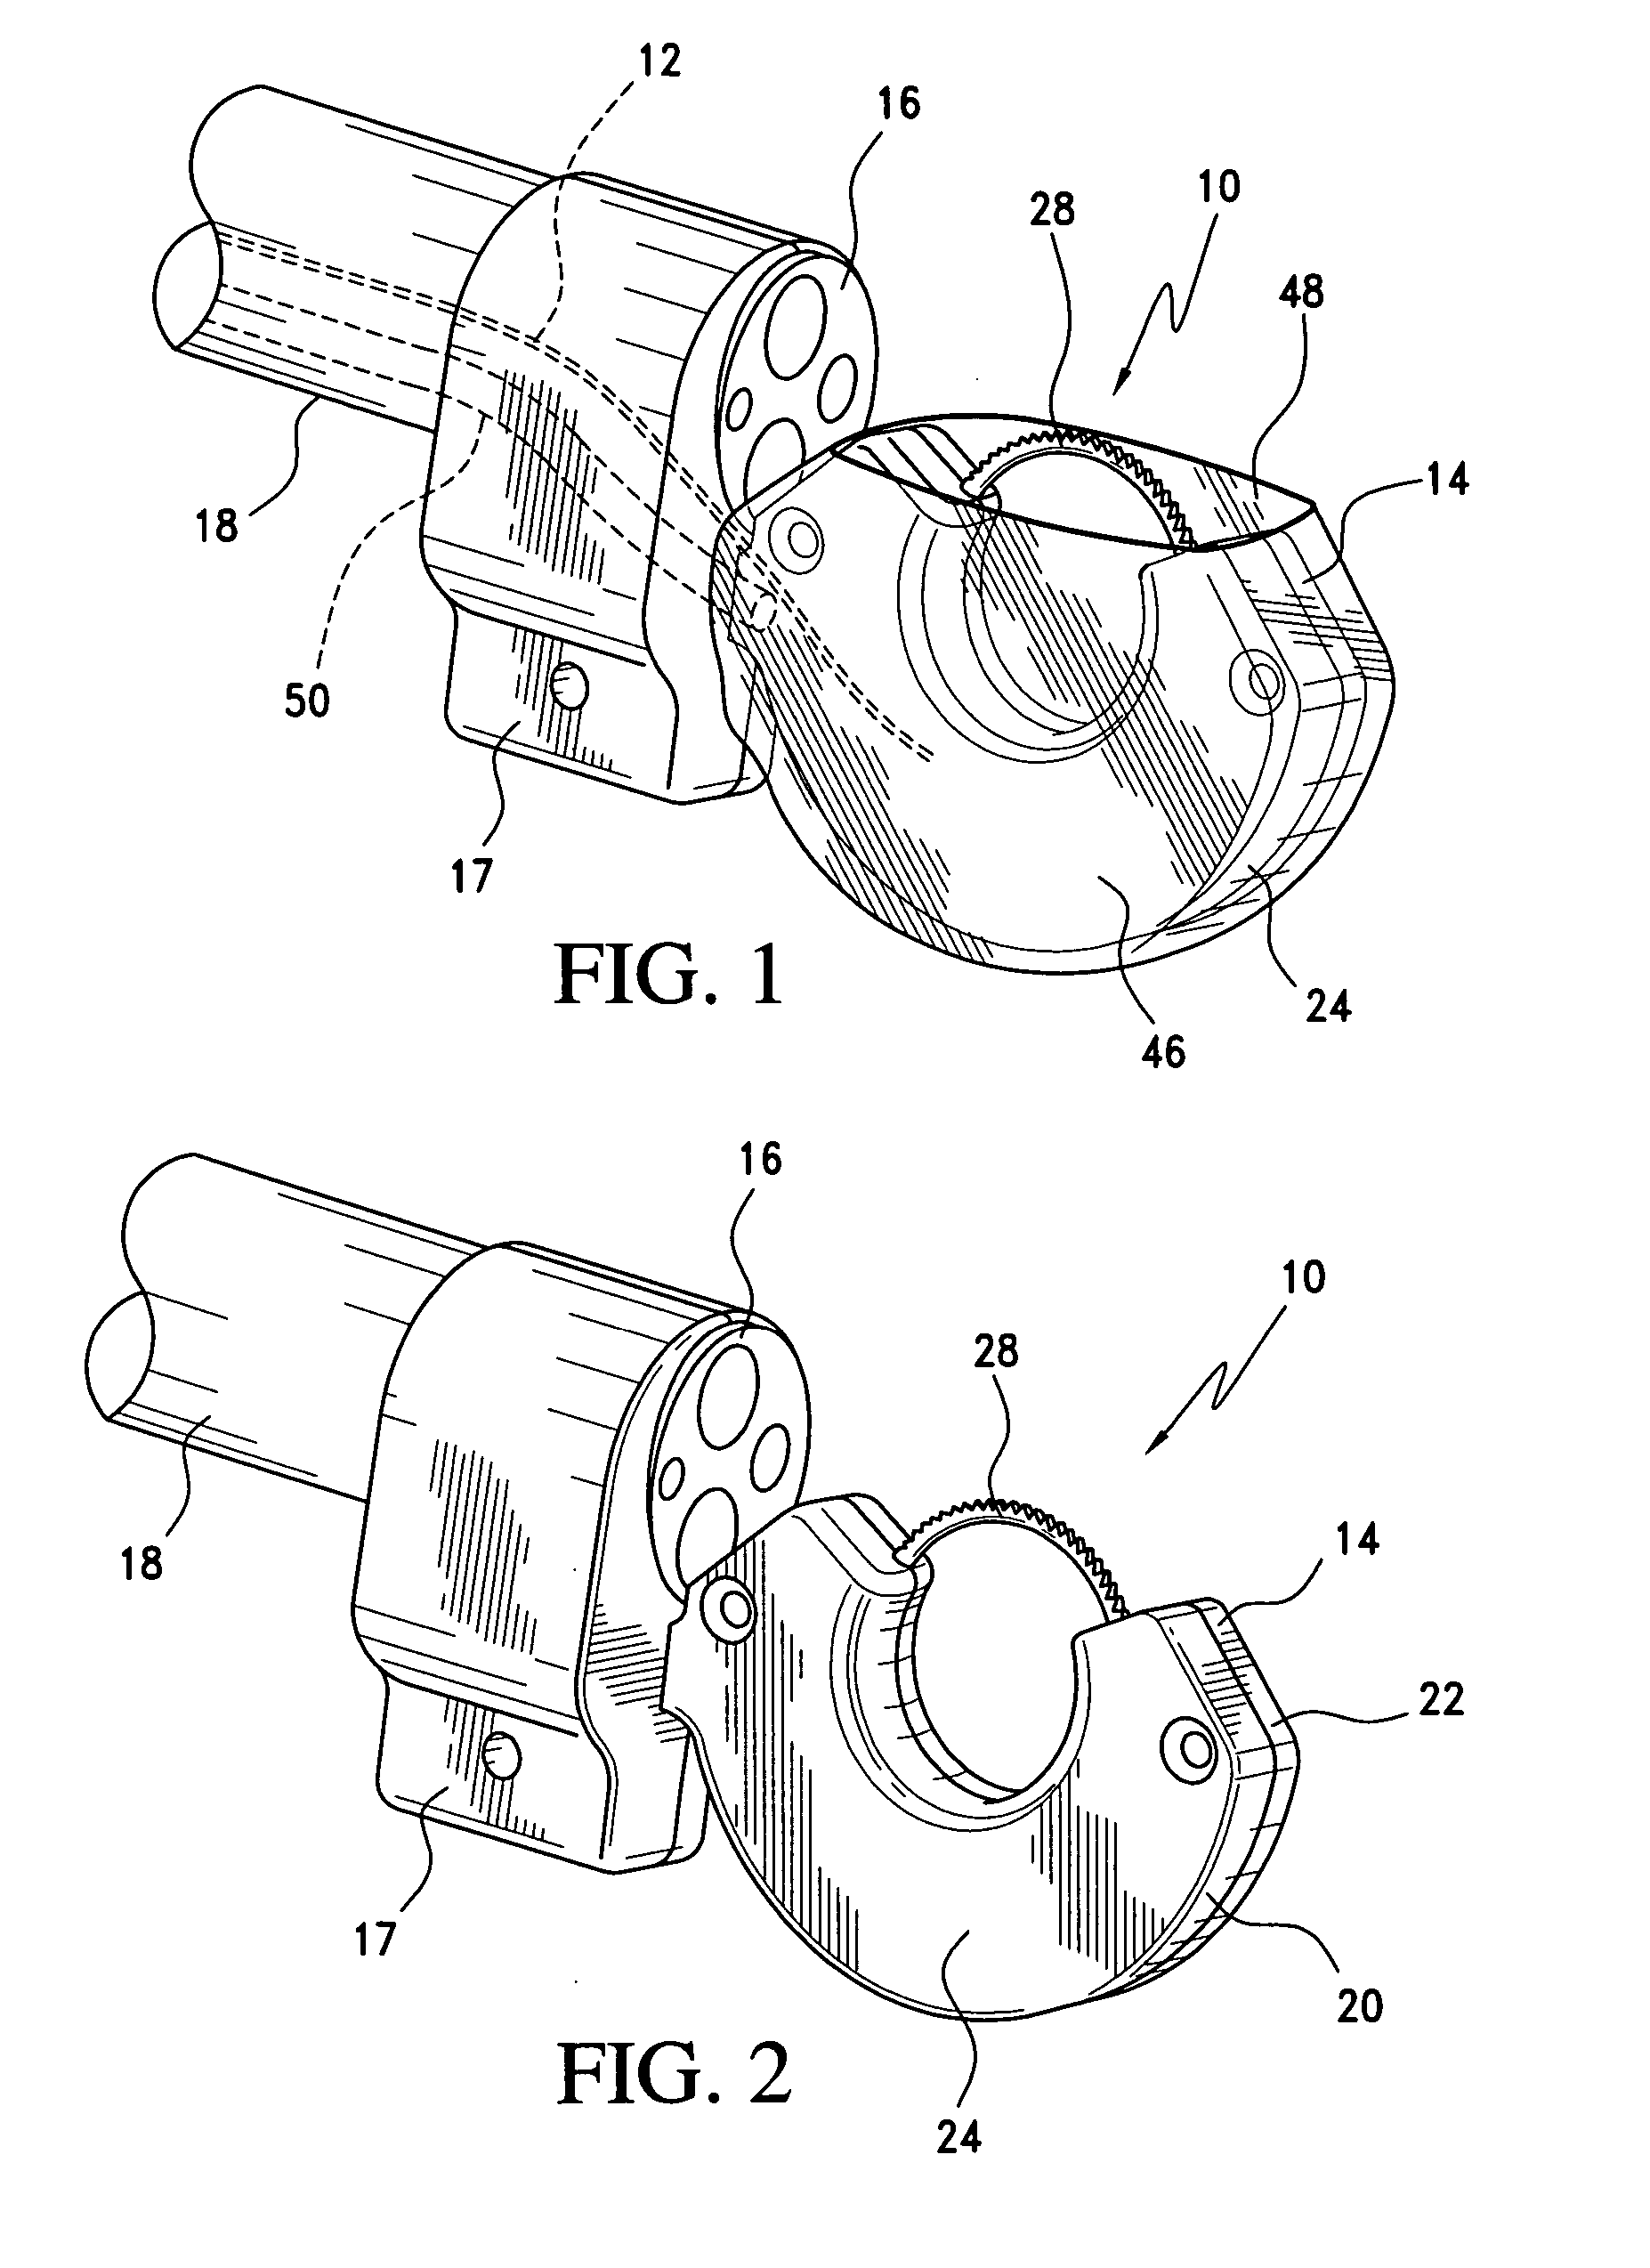 Surgical suturing apparatus with a non-visible spectrum sensing member